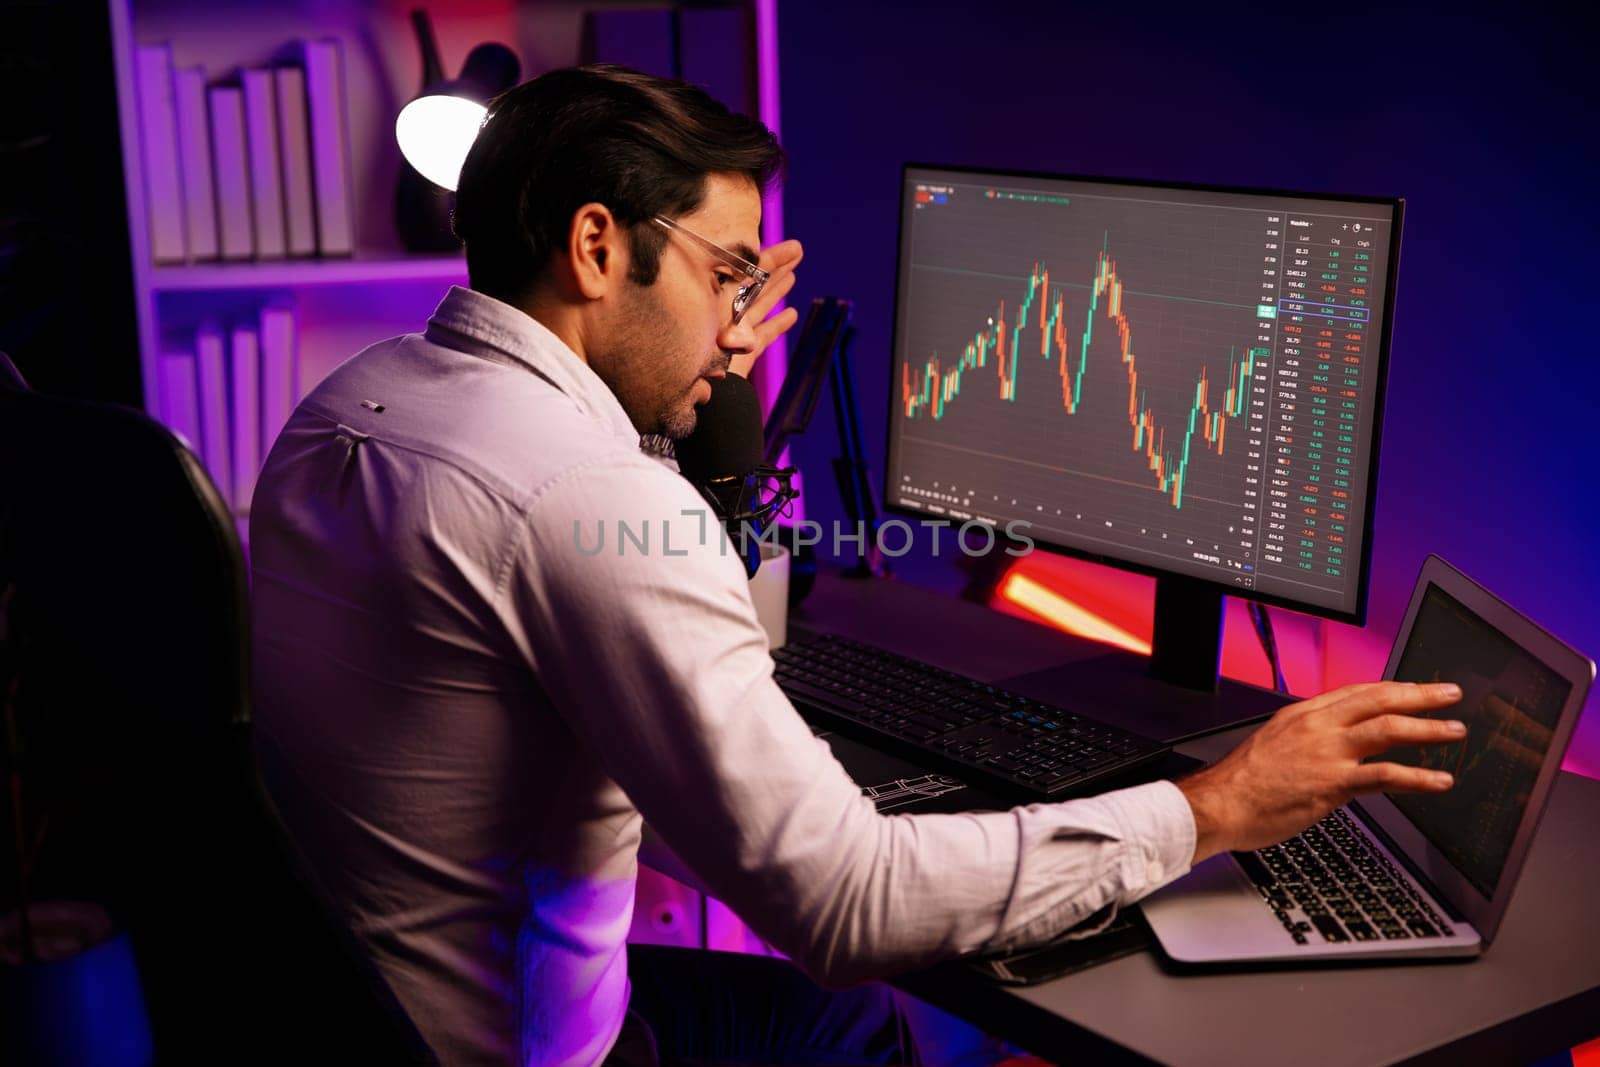 Smart trader concentrating on dynamic stock exchange on pc and laptop. Surmise. by biancoblue